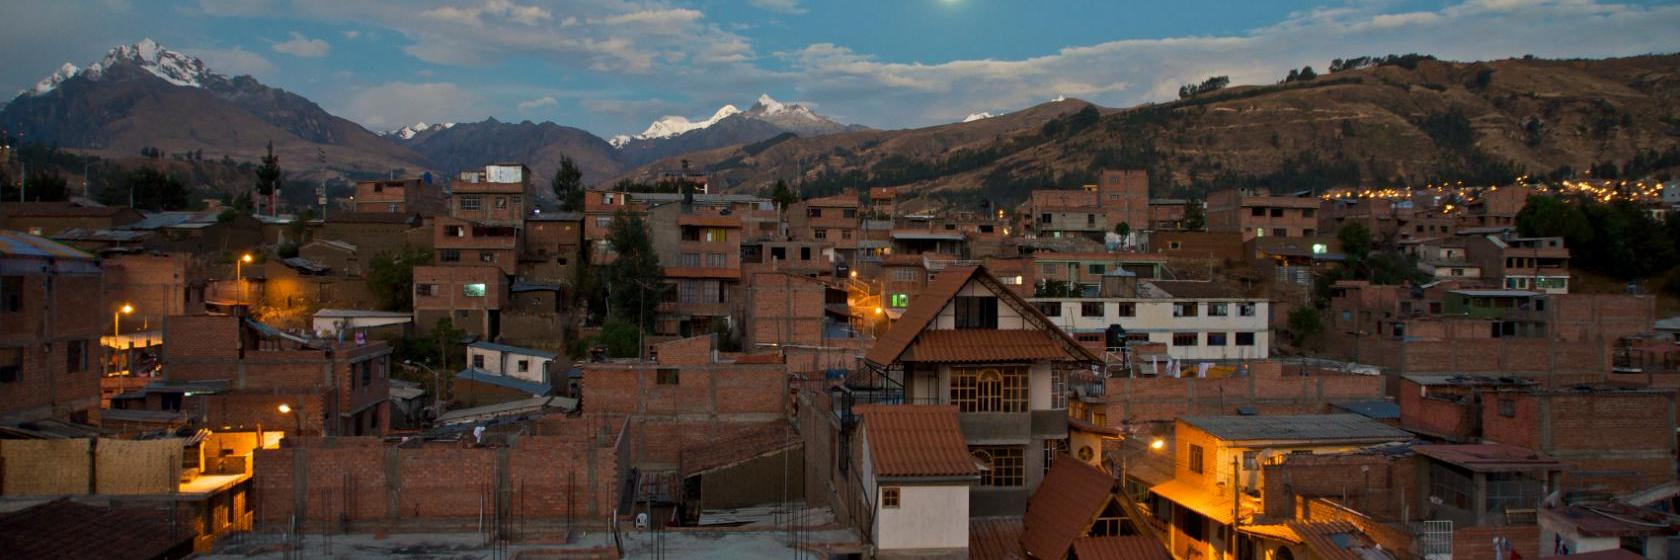 The 10 best hotels & places to stay in Huaraz, Peru - Huaraz hotels